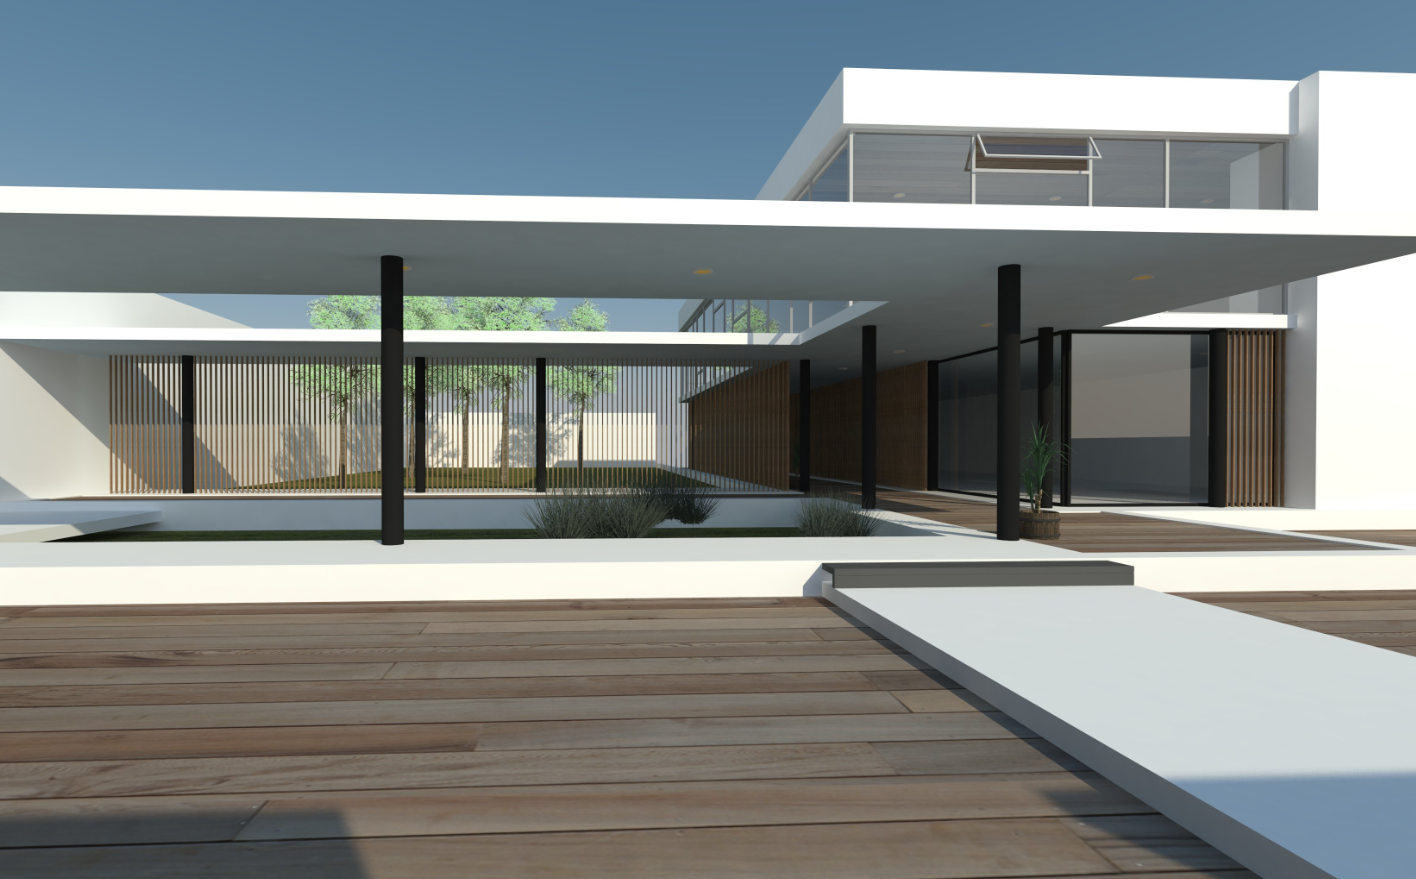  Modern  house  architecture 3d sketchup  model